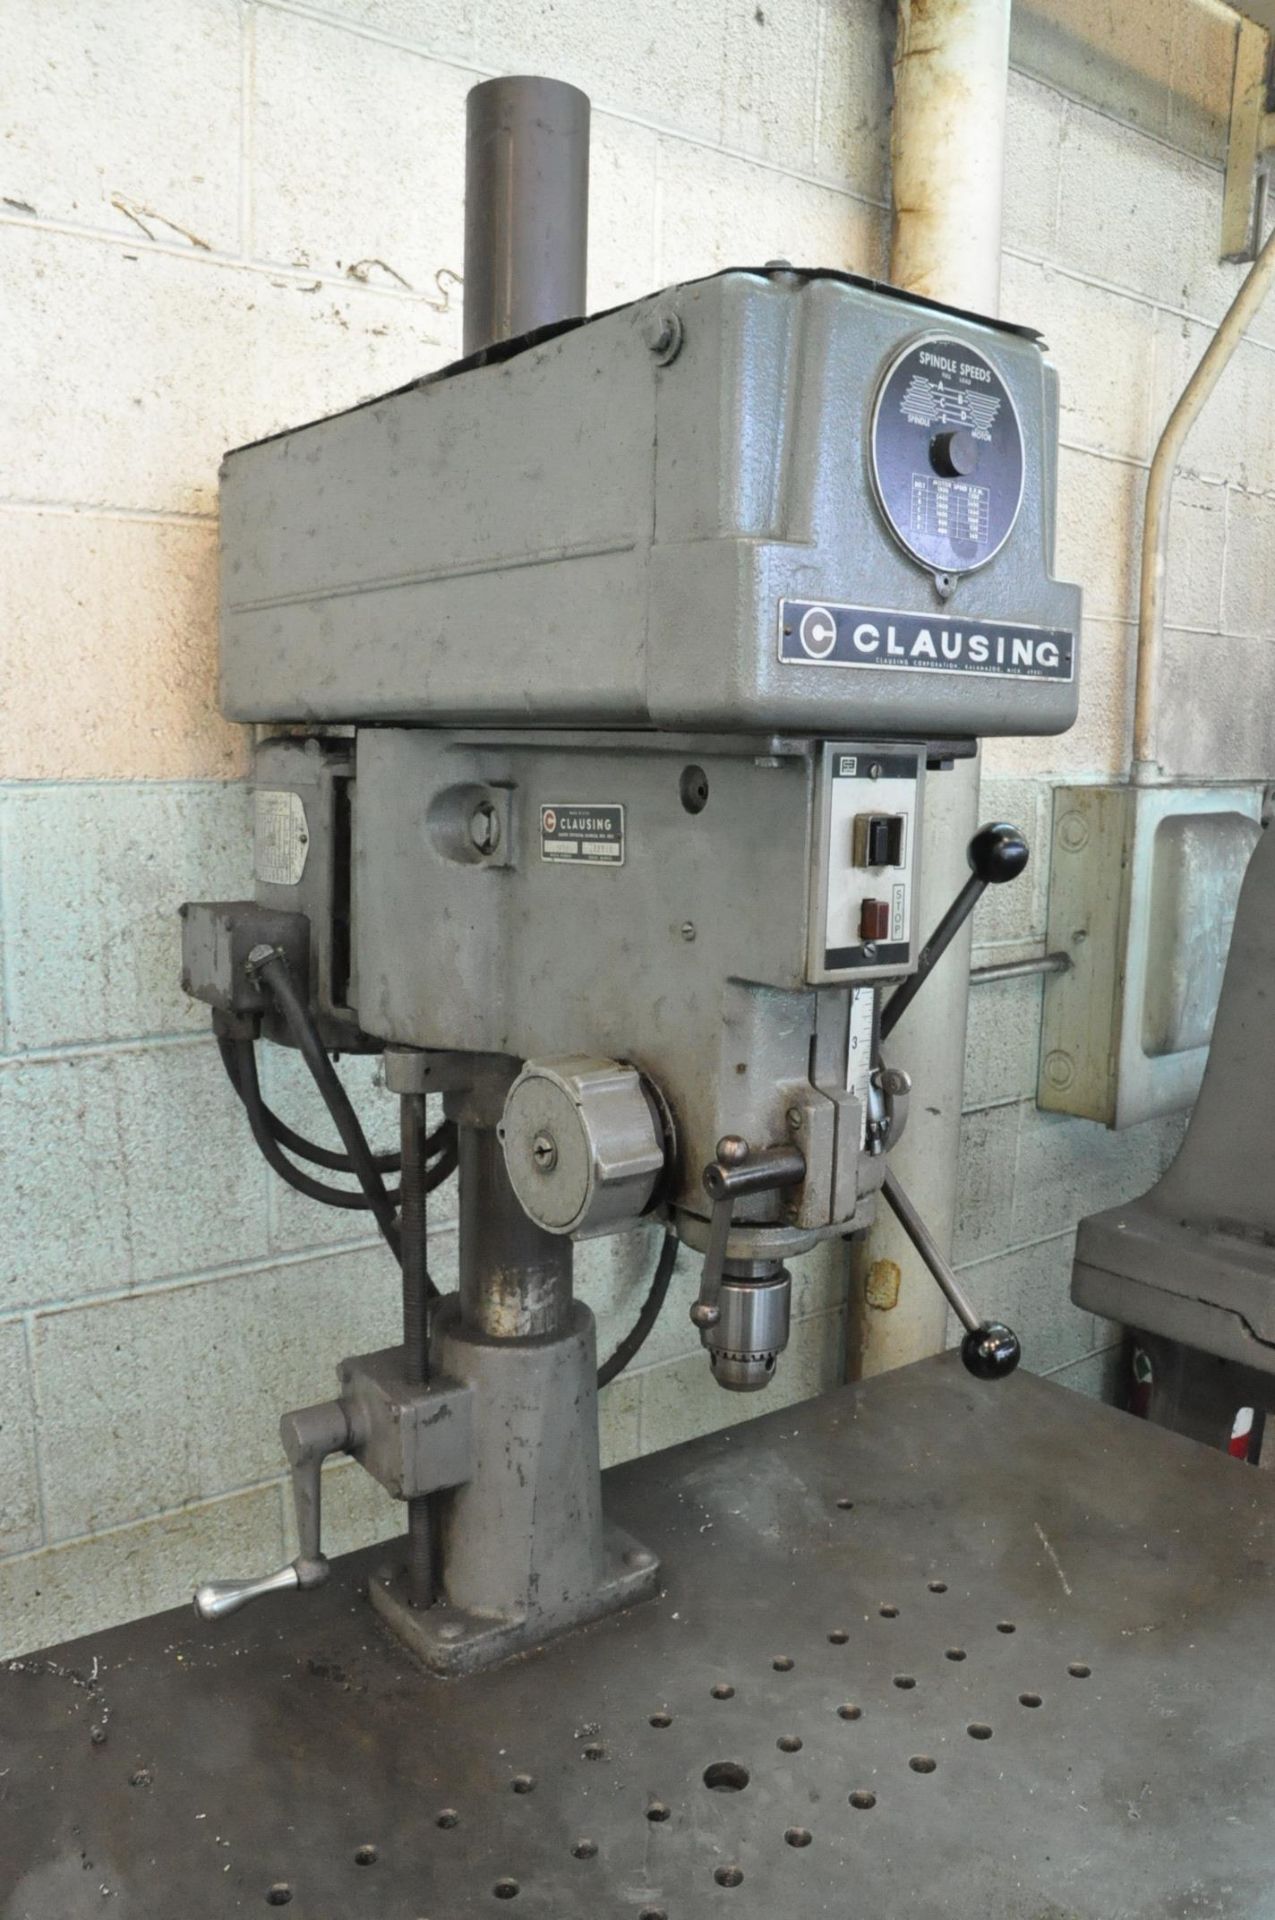 CLAUSING MODEL 1634 15” TABLE TYPE DRILL PRESS, S/N 122212, 48” X 24” TABLE, ¾ HP MOTOR, WITH - Image 3 of 5